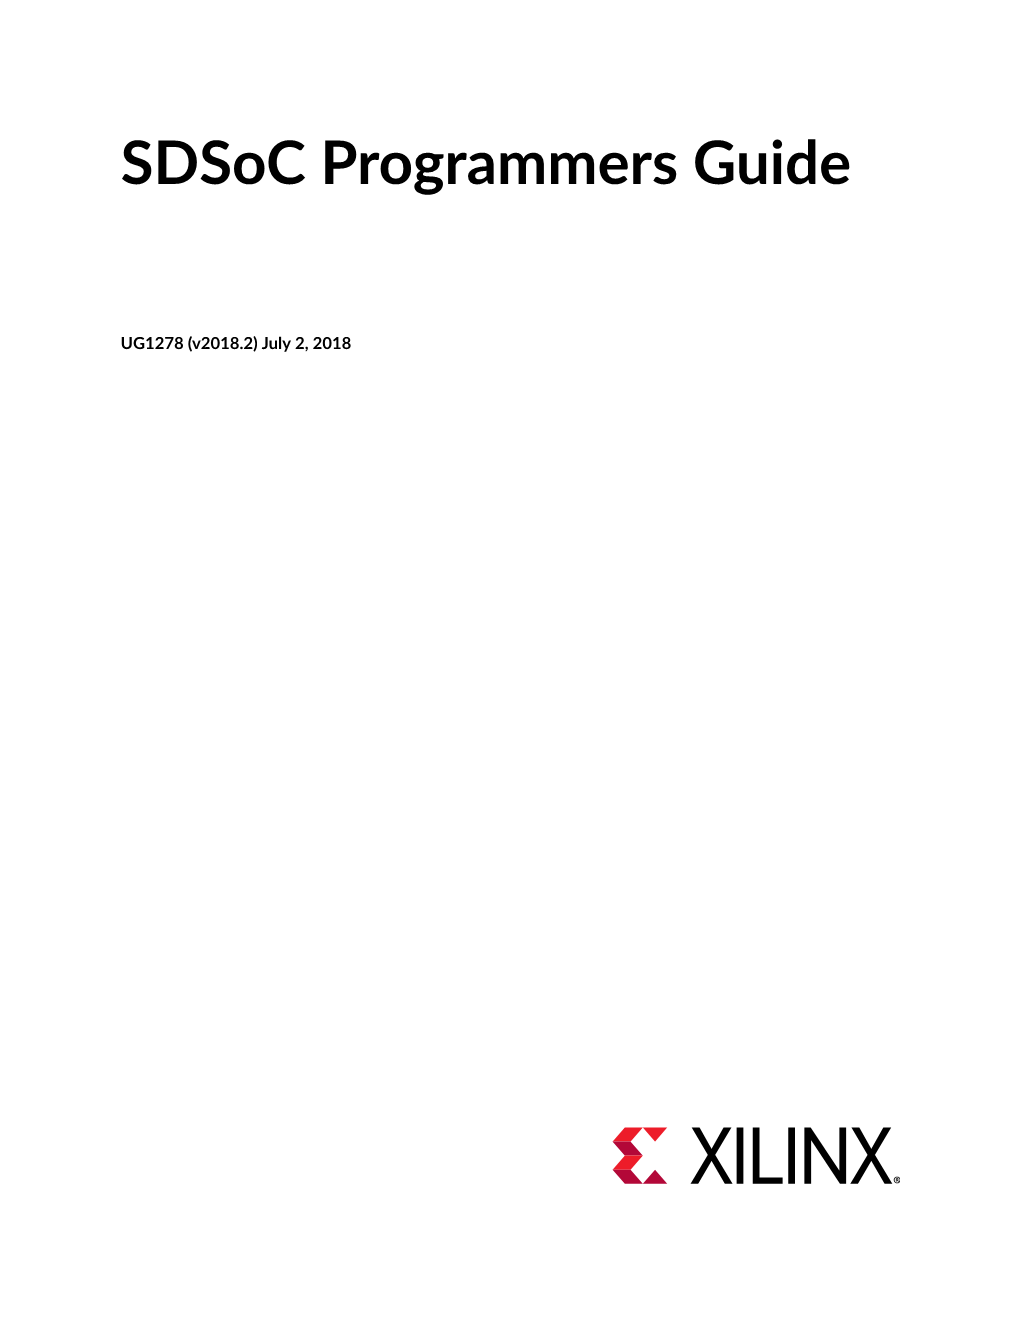 Sdsoc Programmers Guide